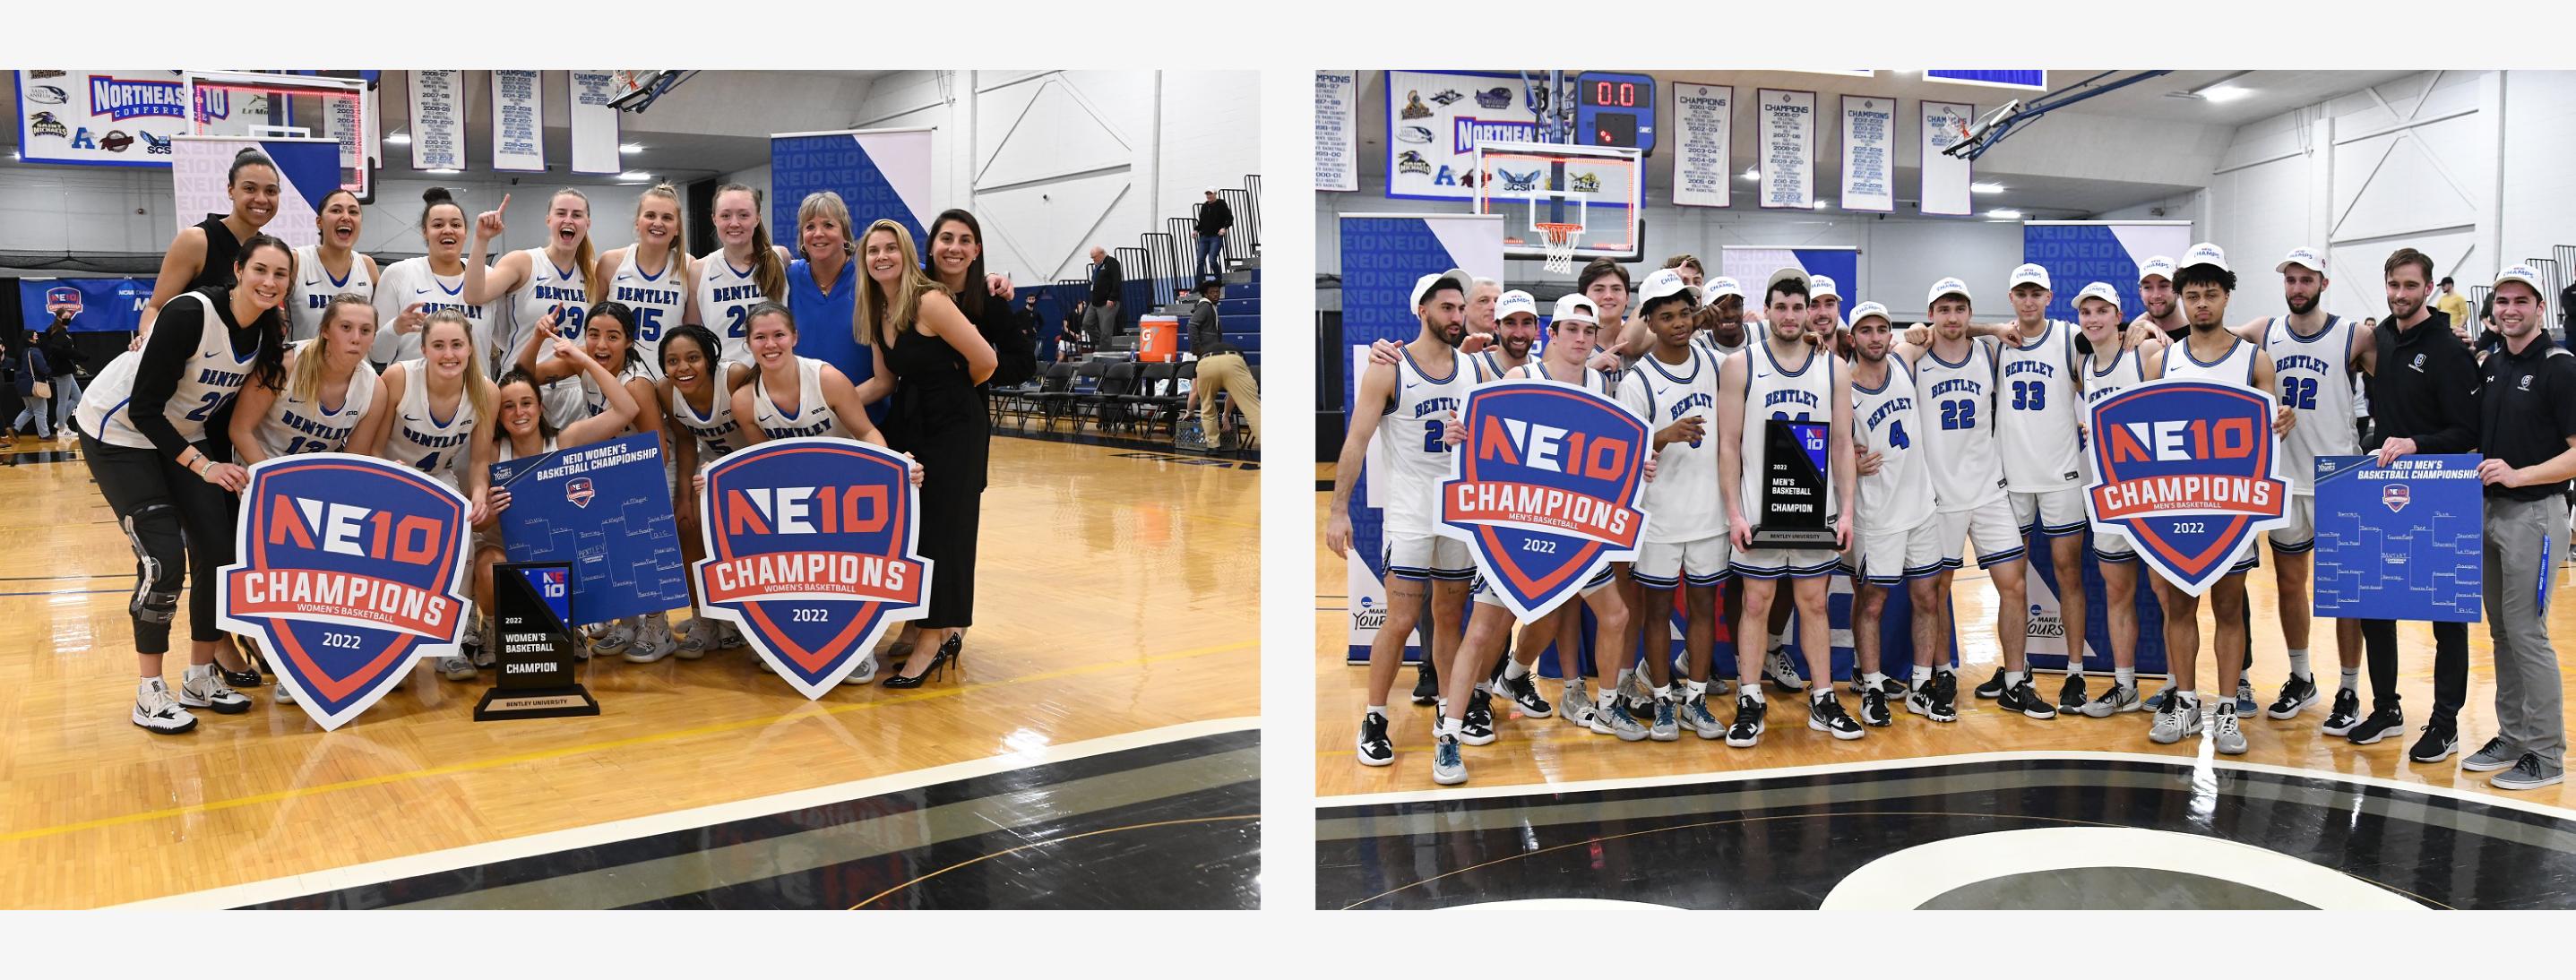 Men's and women's basketball teams with their championships